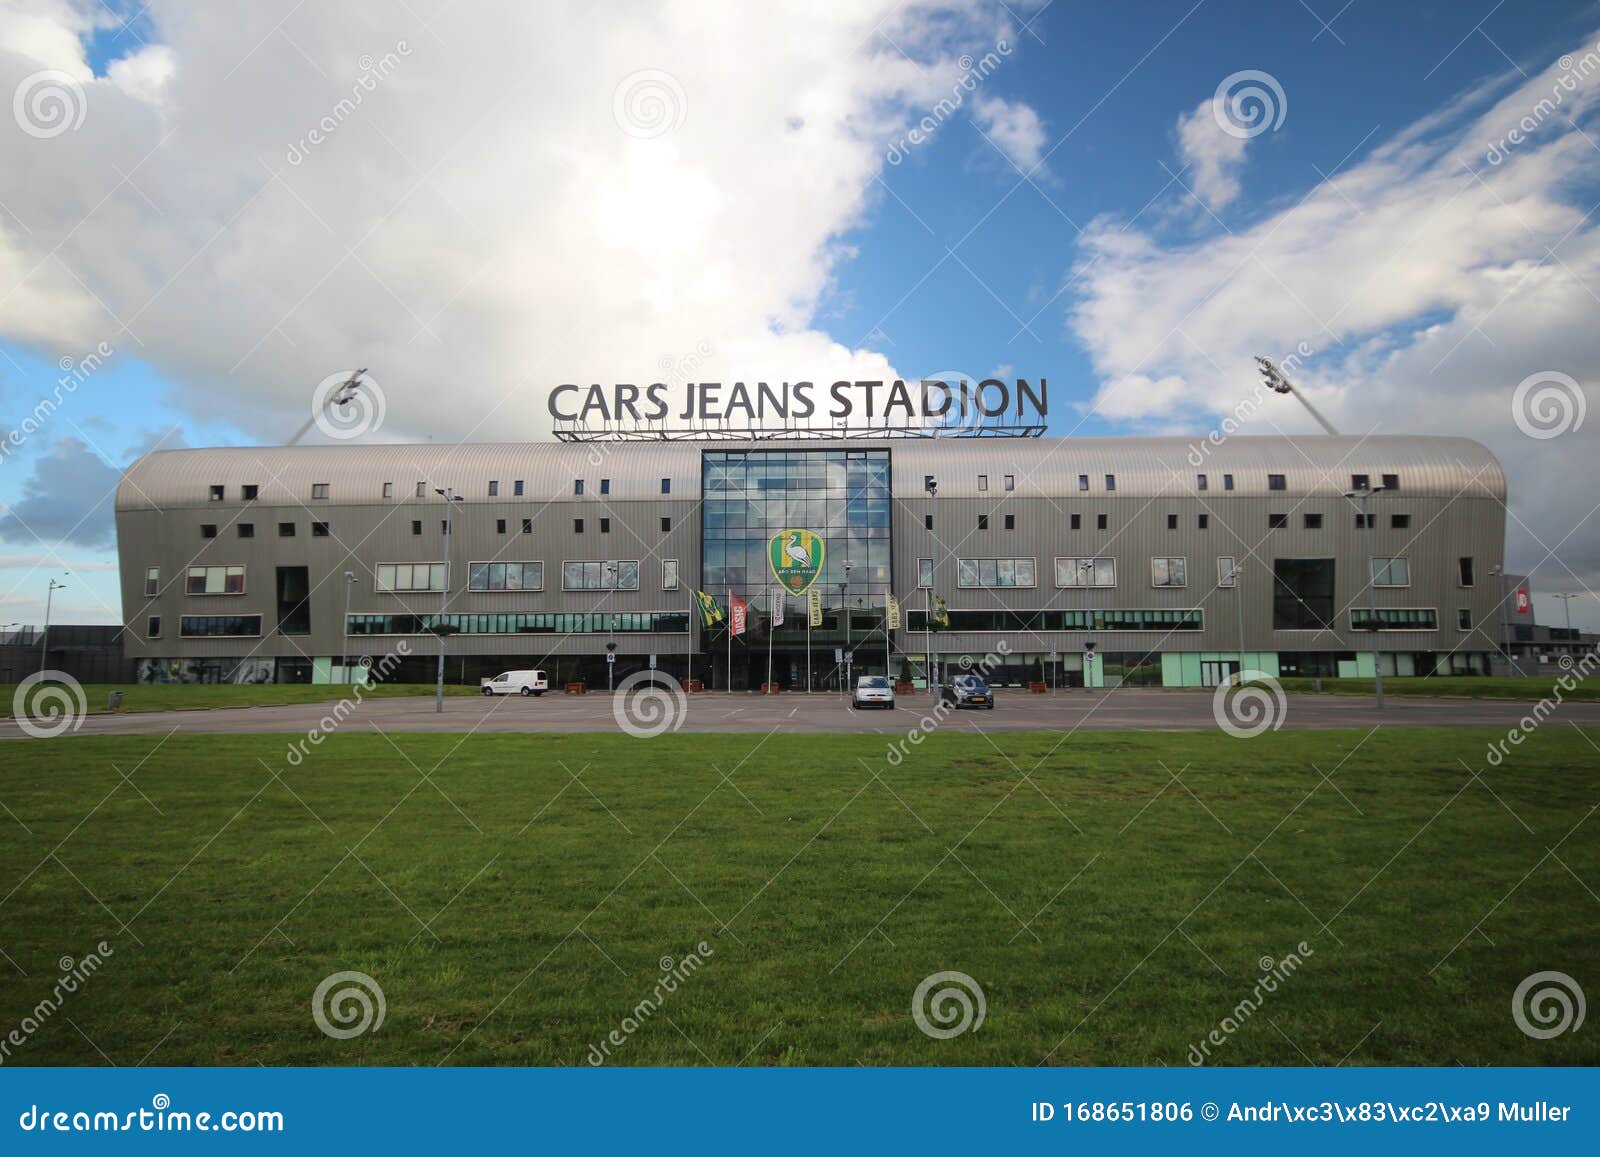 Cars Jeans Stadion, Footbal Soccer Stadium of ADO Haag in the Hague, Netherlands Editorial Photo - Image of cars, jeans: 168651806